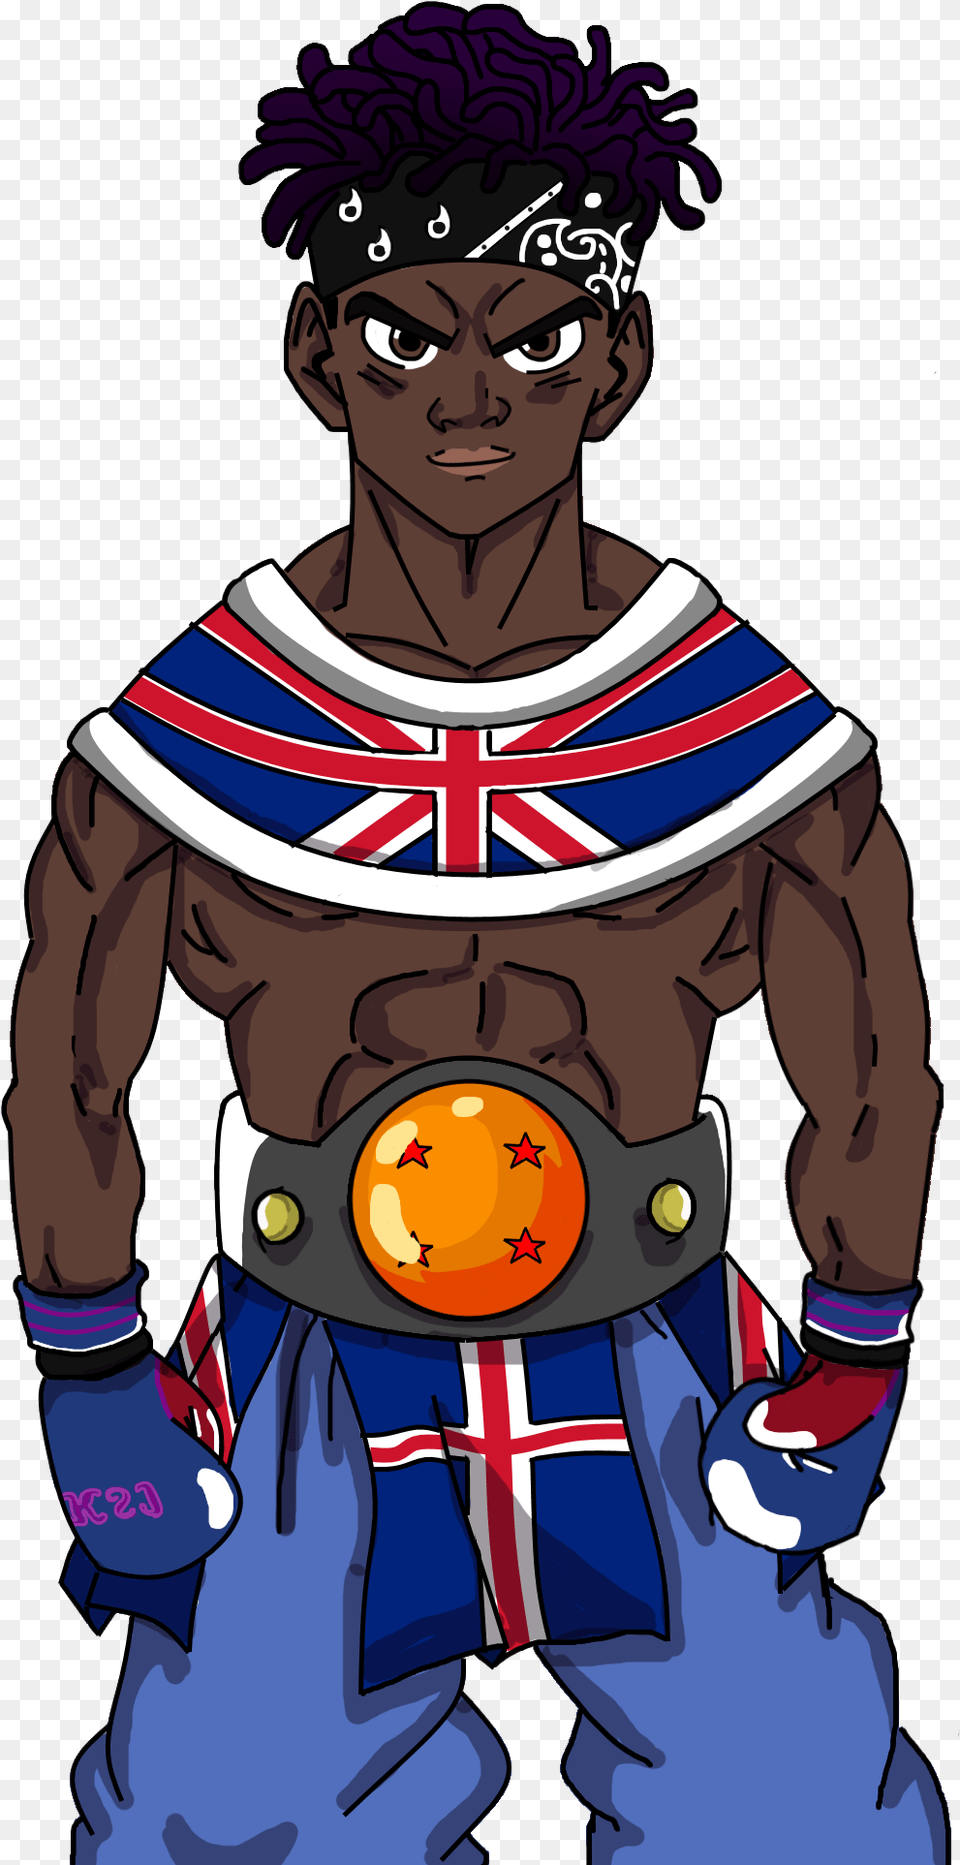 Drew Ksi In A Dragon Ball Ish Style Hope Yall Like It Ksi Ksi Dragon Ball Style, Book, Comics, Publication, Adult Free Png Download